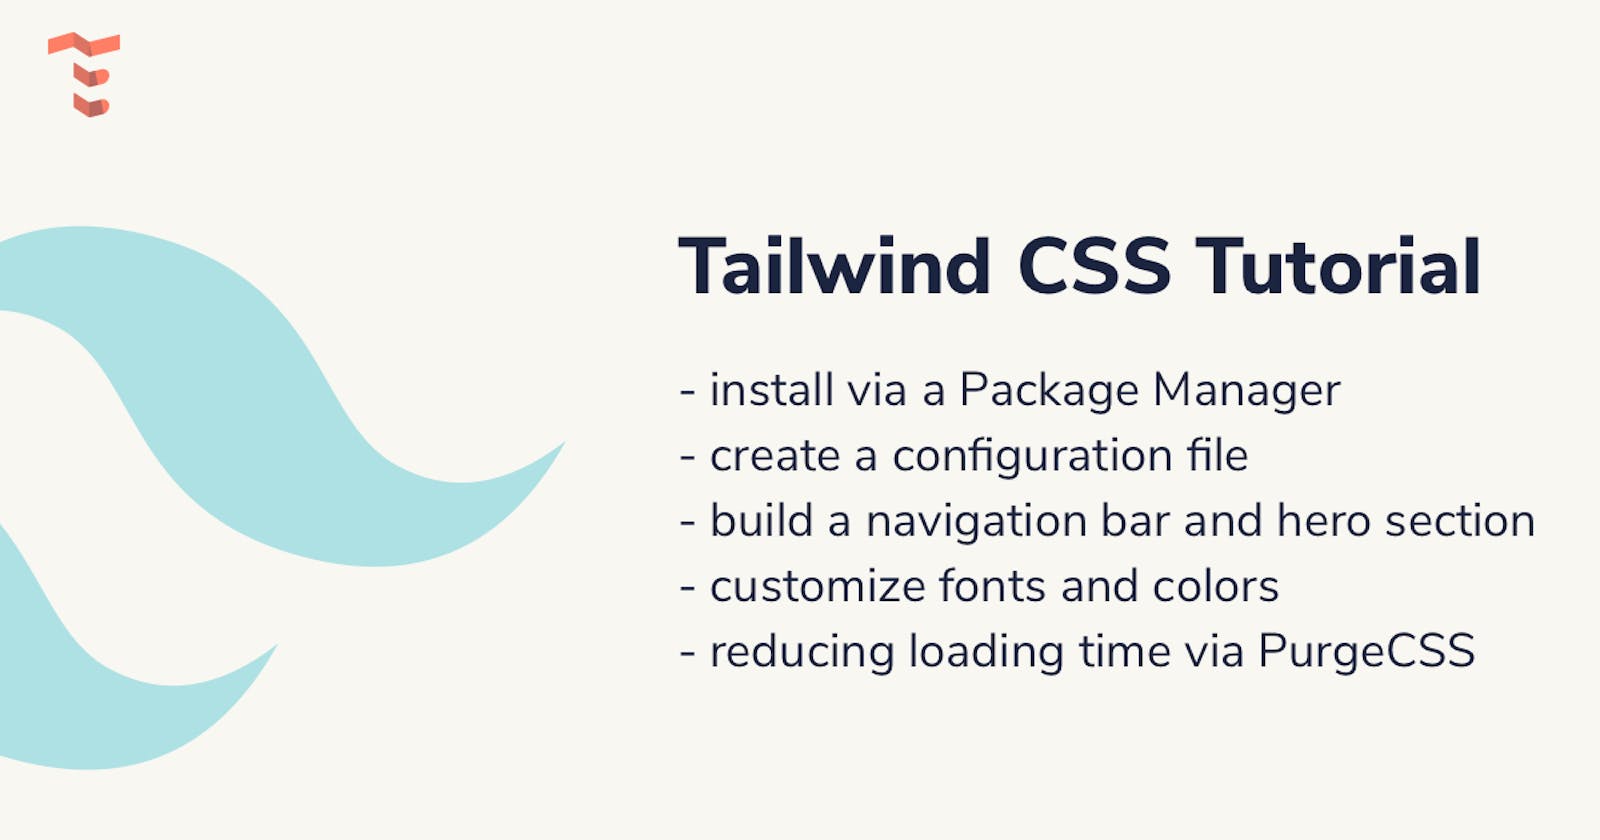 Tailwind CSS tutorial: learn how to build websites using a utility-first CSS framework